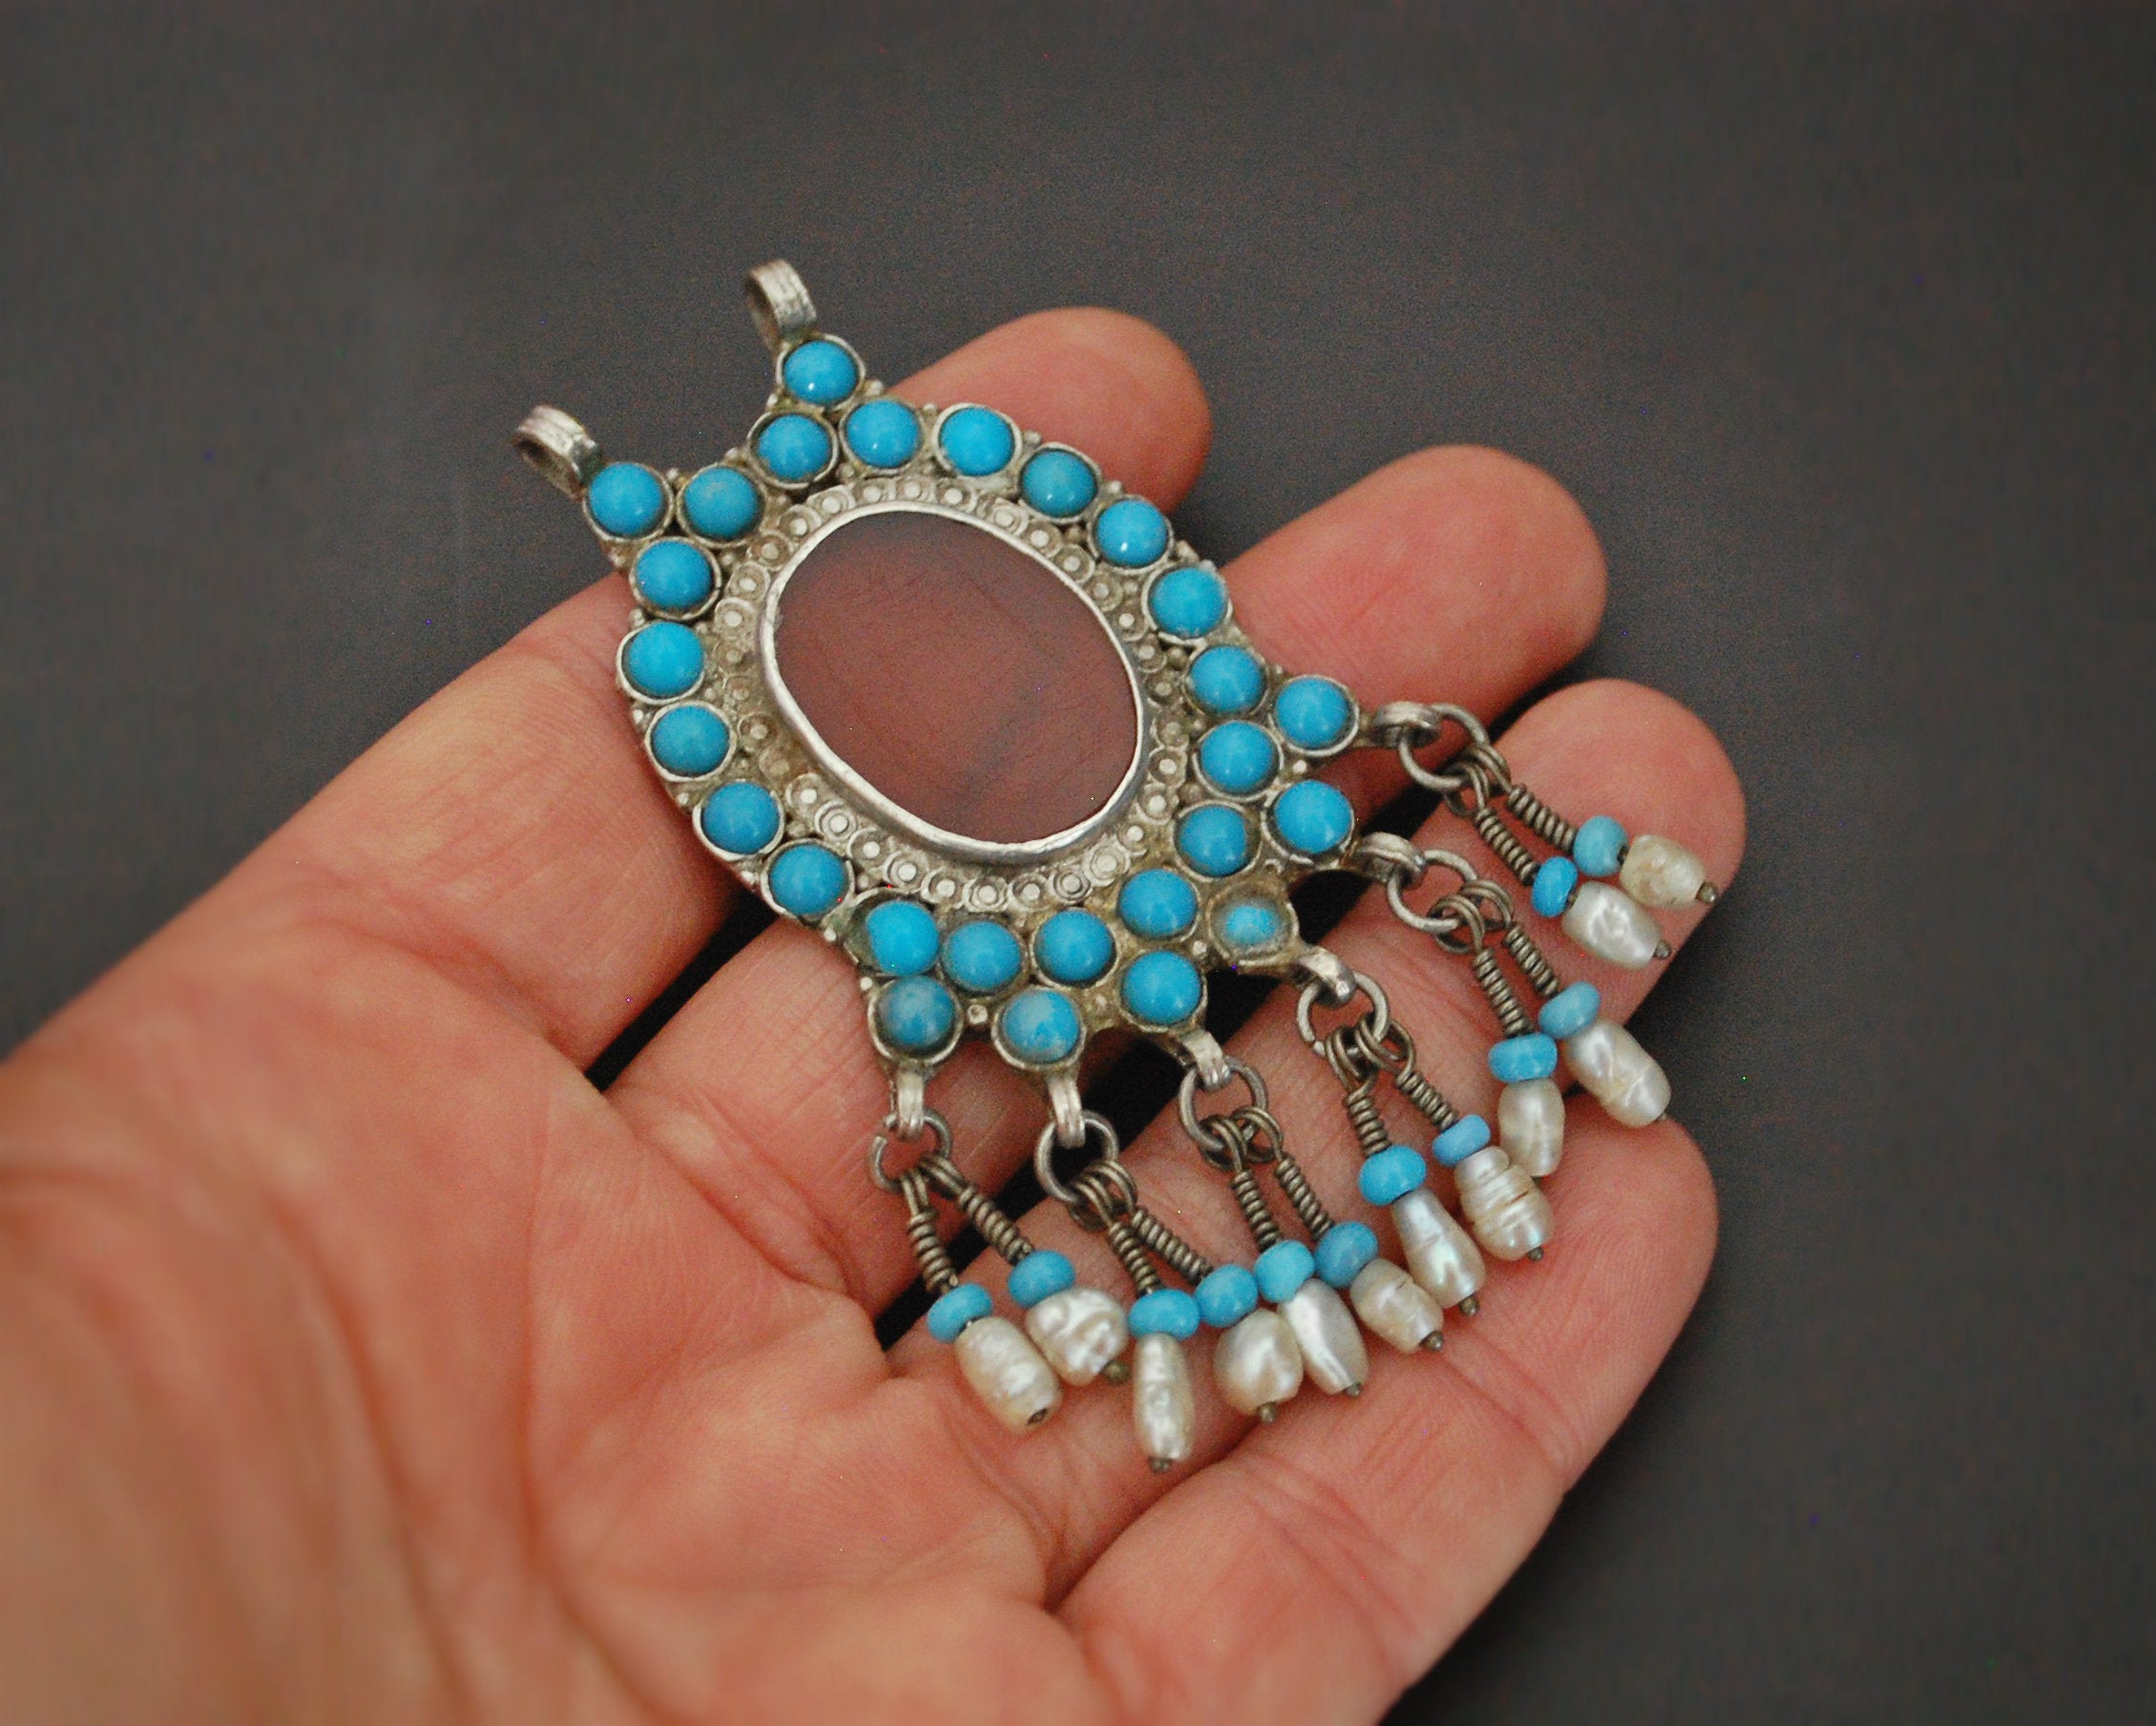 Afghani Carnelian Pendant with Turquoise and Pearls -